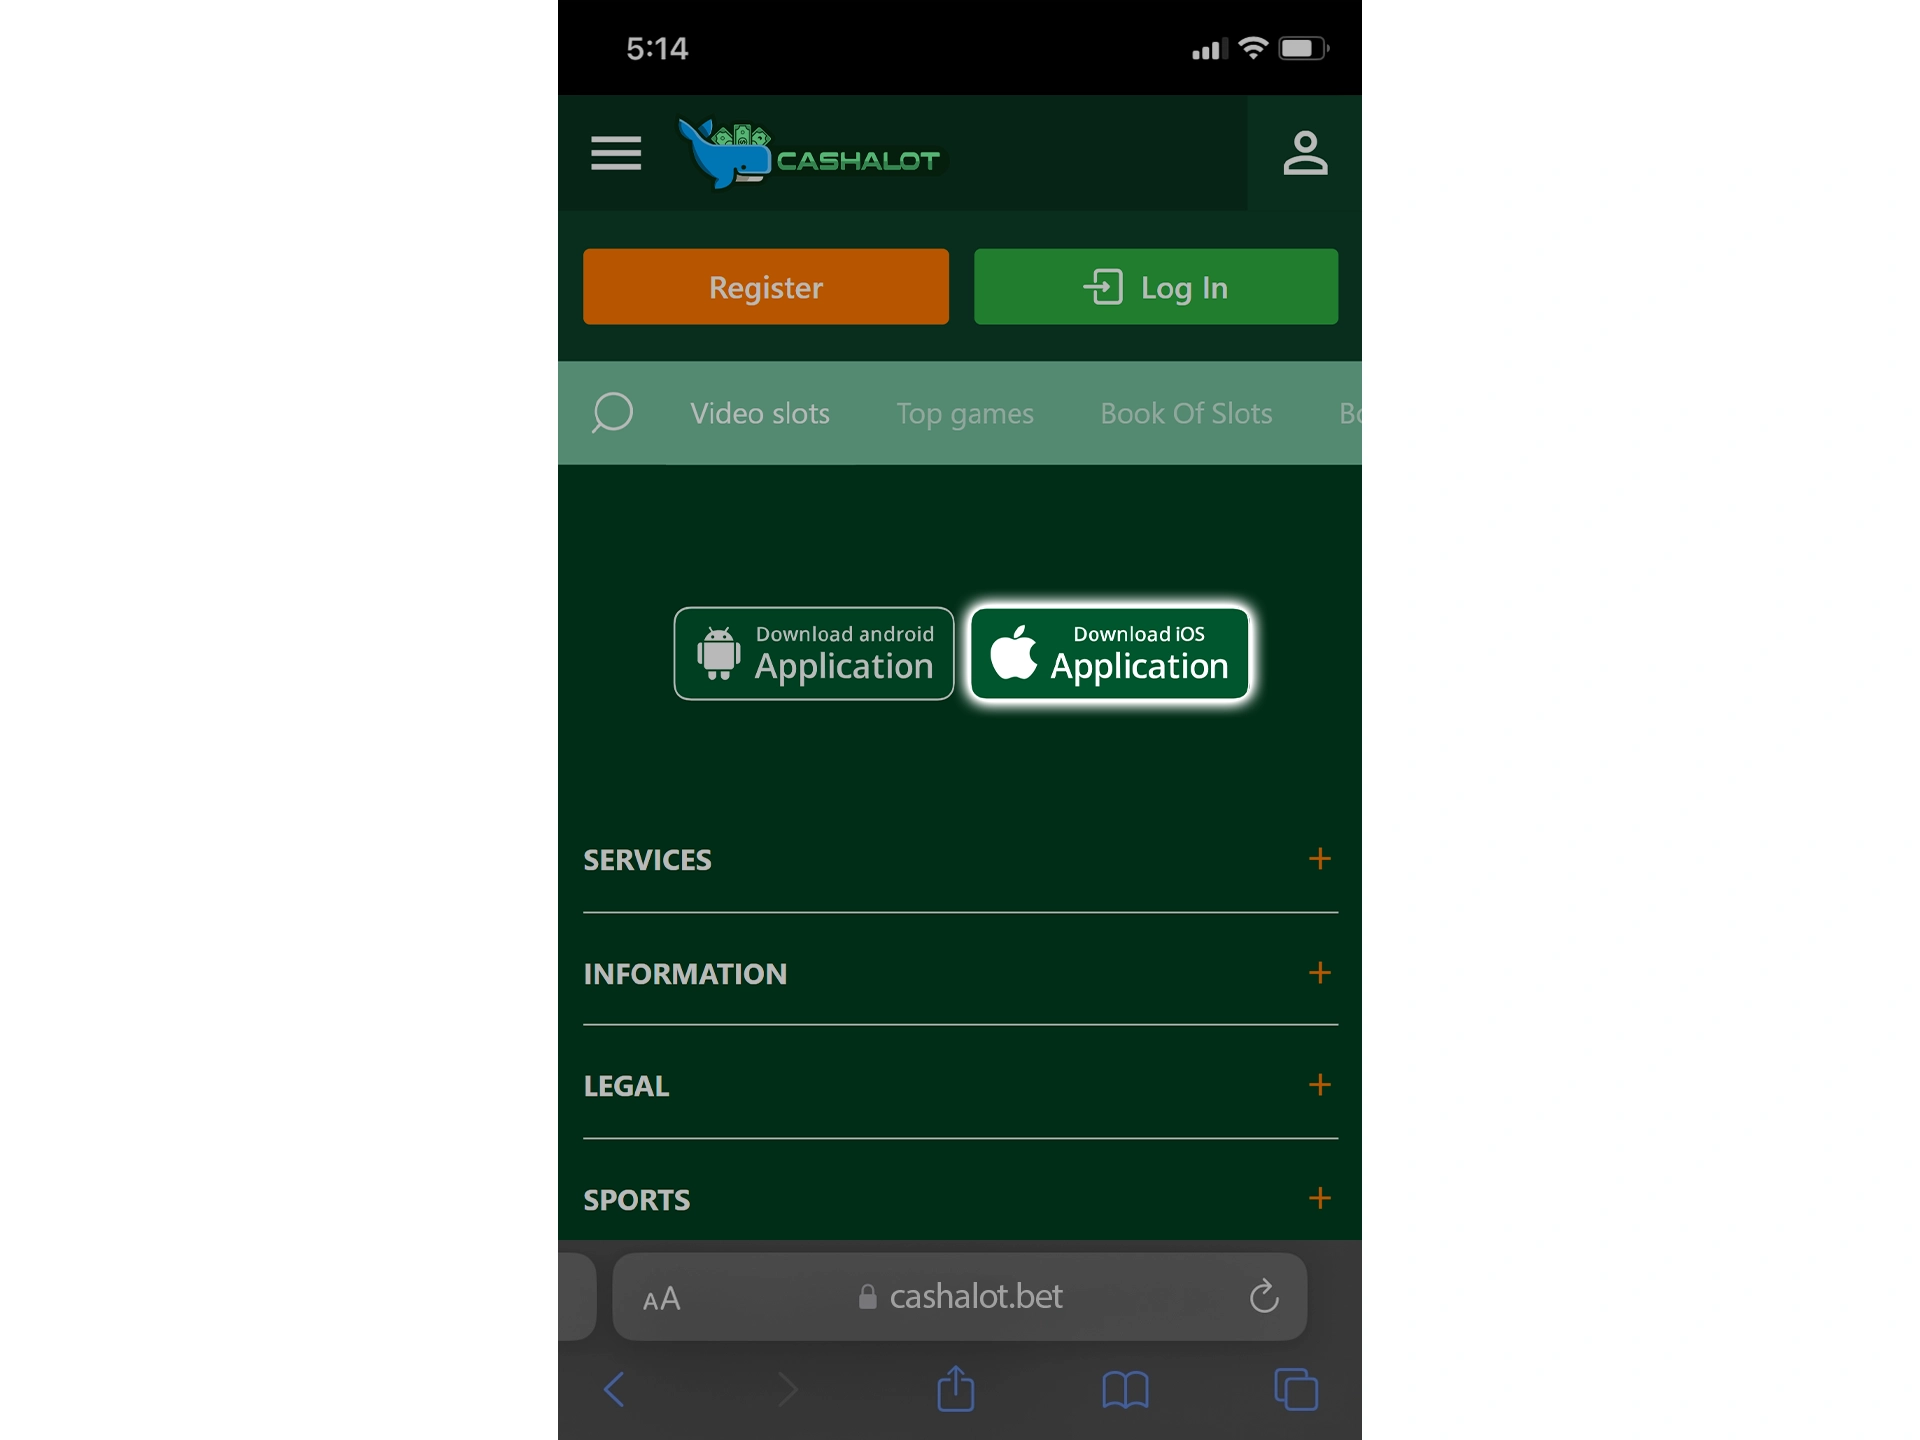 Find the Cashalot.bet app download button and start the installation process.